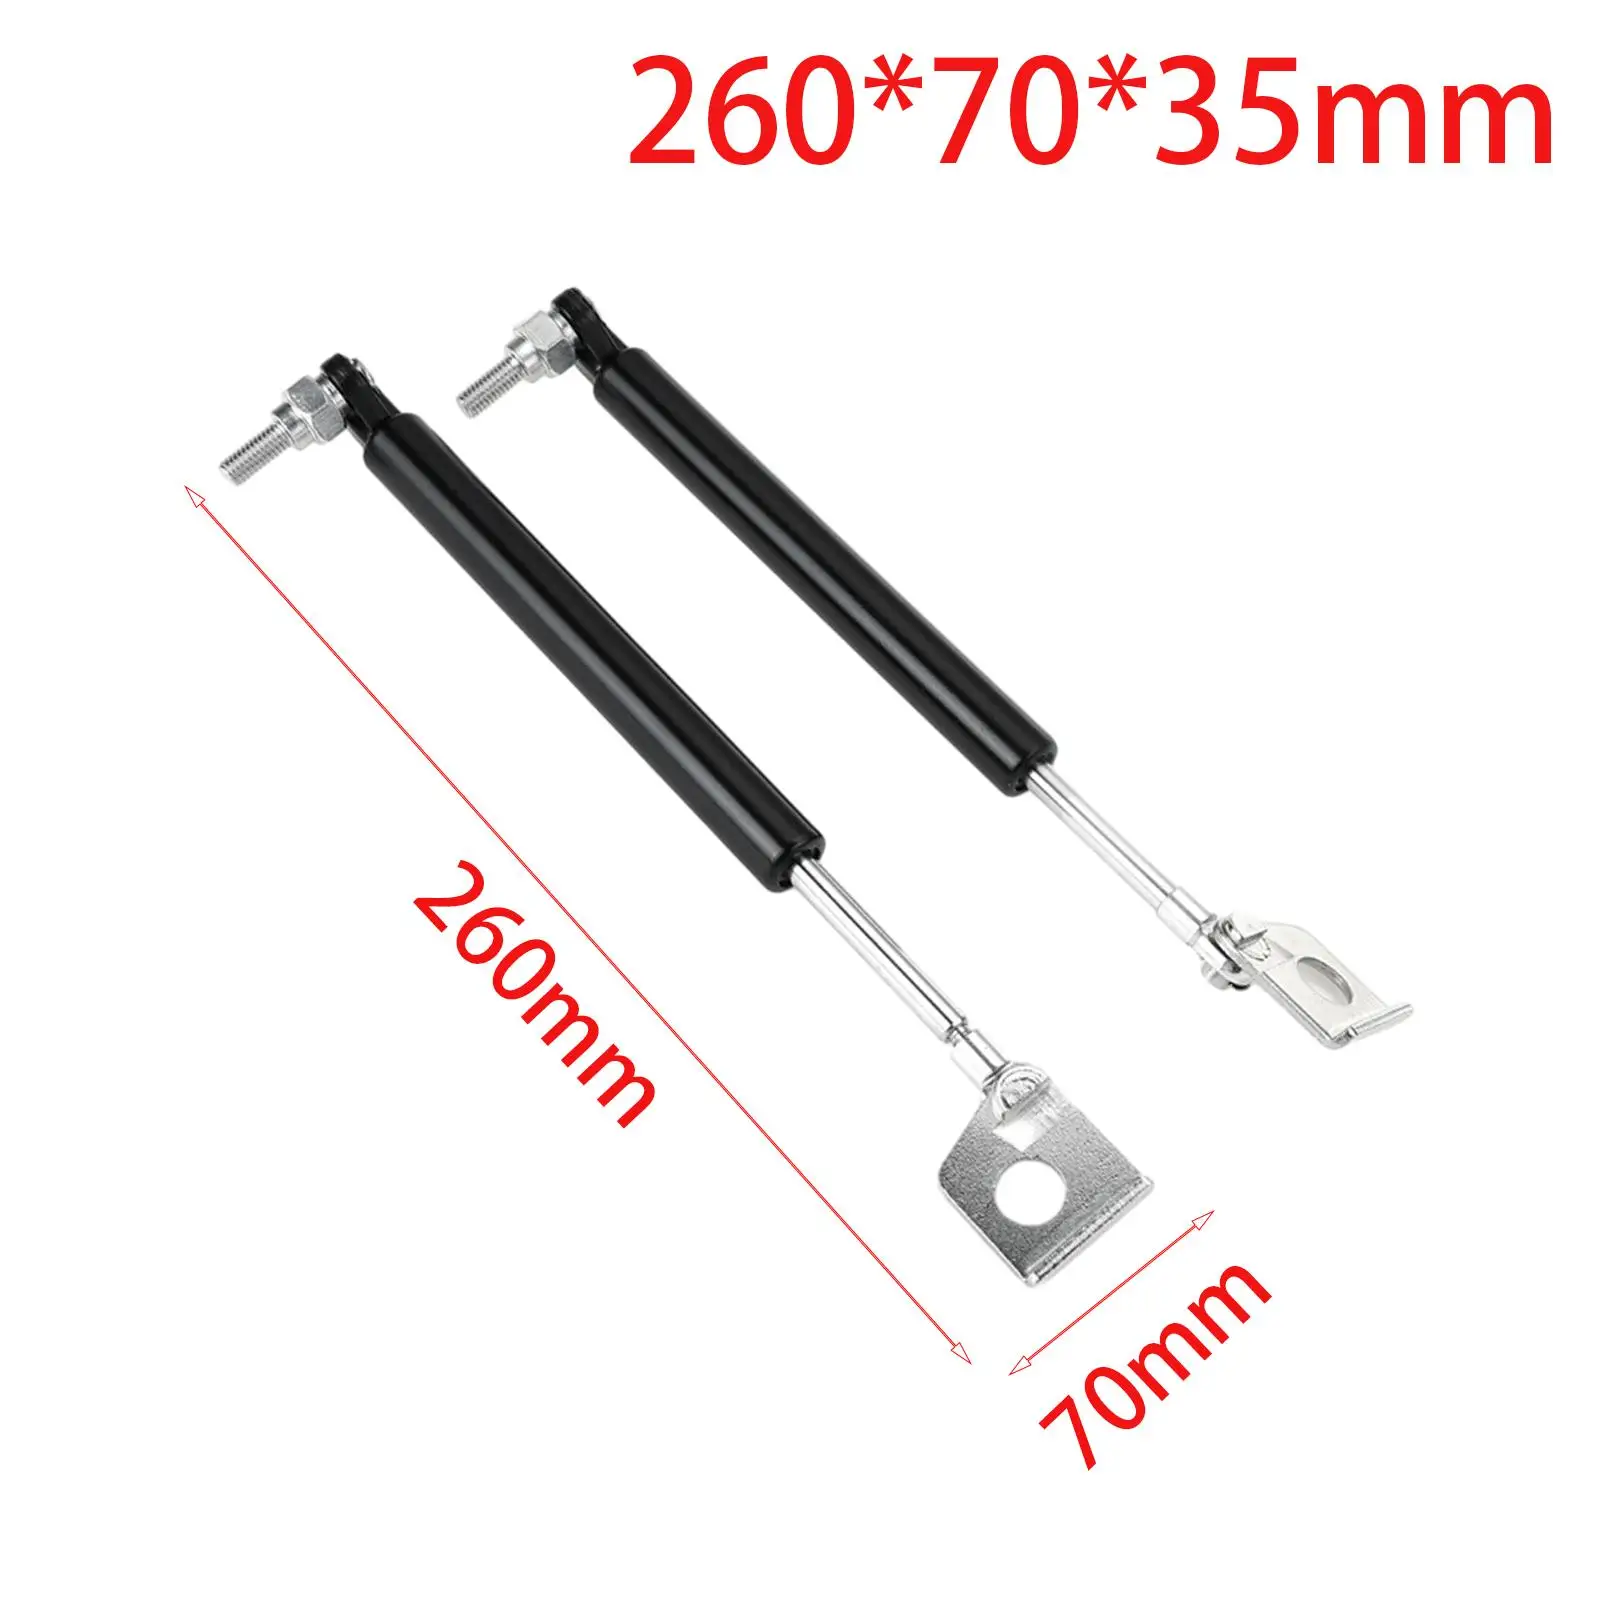 2x Rear Trunk Tailgate Gas Strut Damper Lift Supports Replace Parts for VW Amarok 2011-2020 Car Accessories Easy Installation